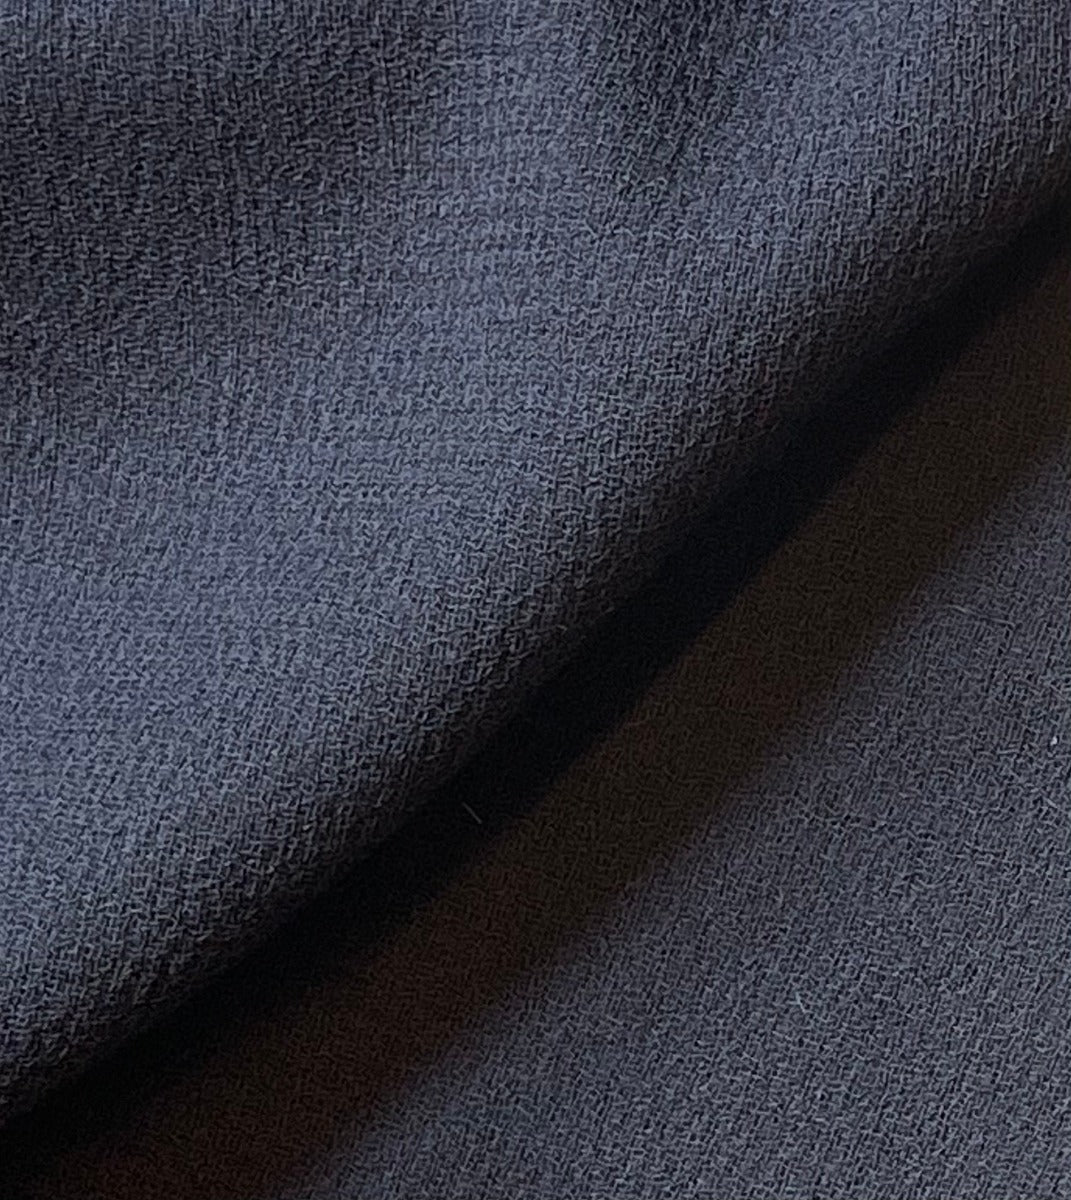 Deep Inky Blue Double-Faced Wool Crepe